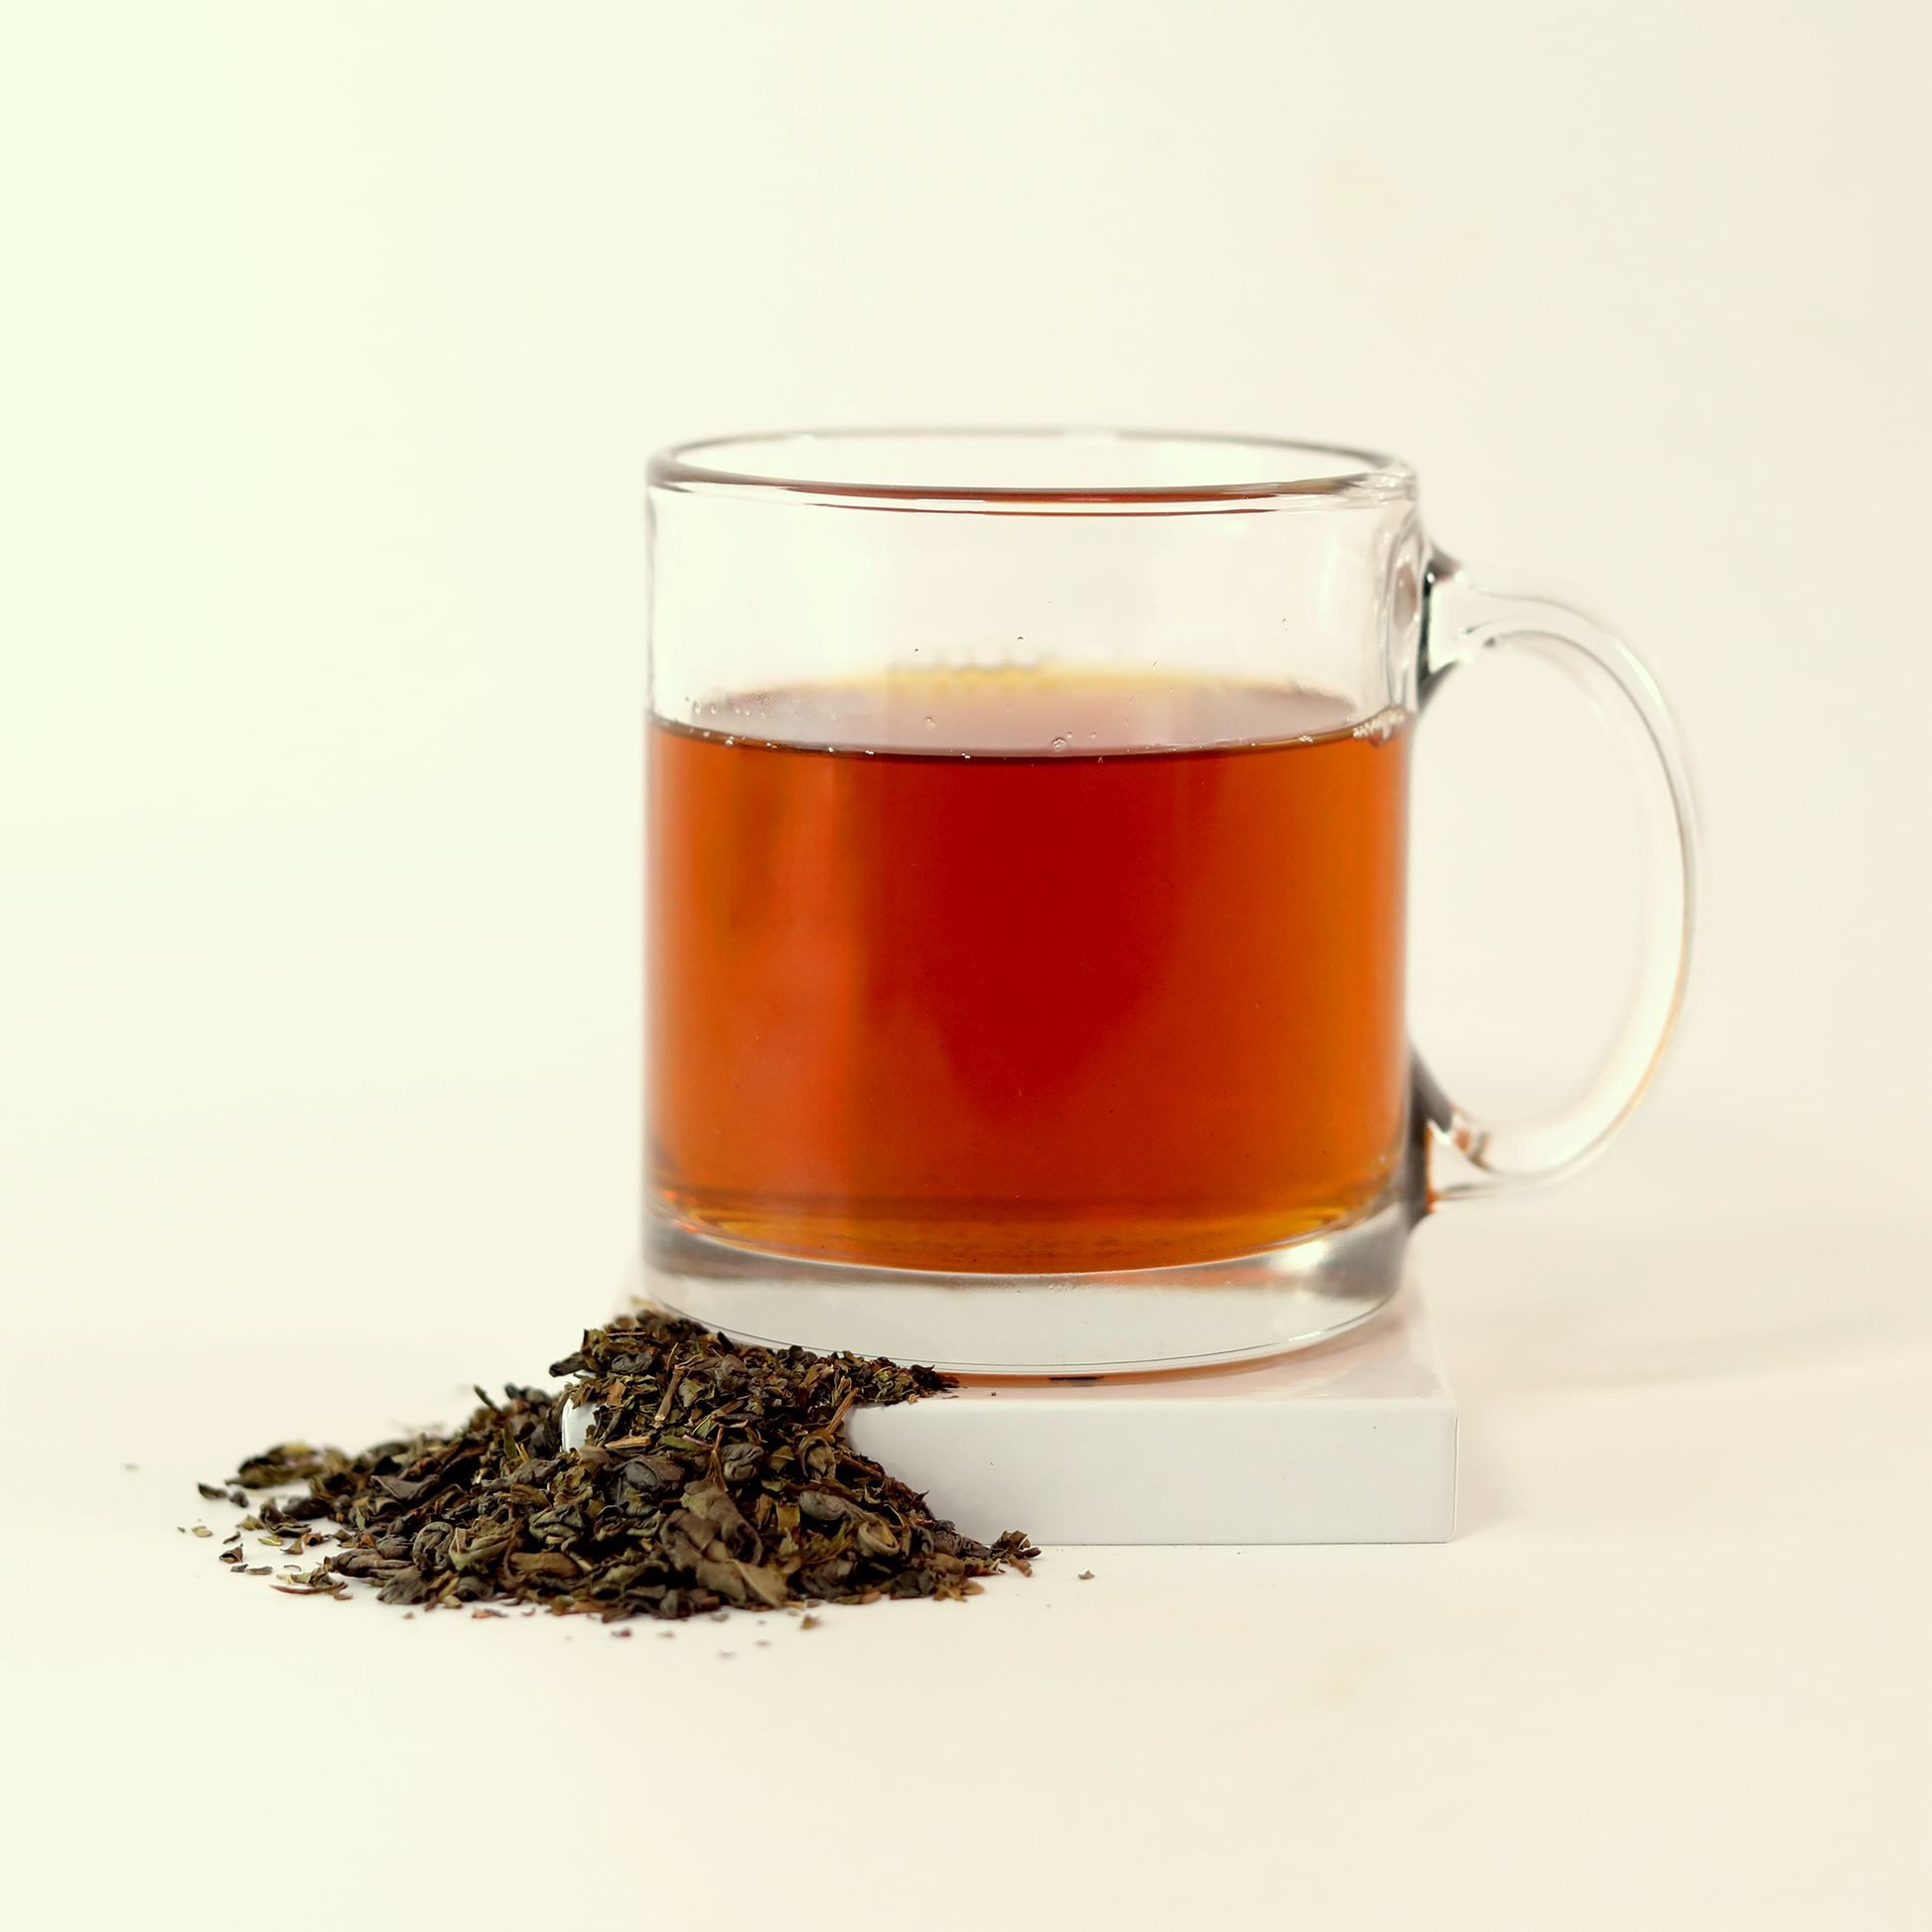  A clear glass mug filled with light orange tea - April Meadows Green -  next to a small pile of dried tea leaves. A Good Store product.